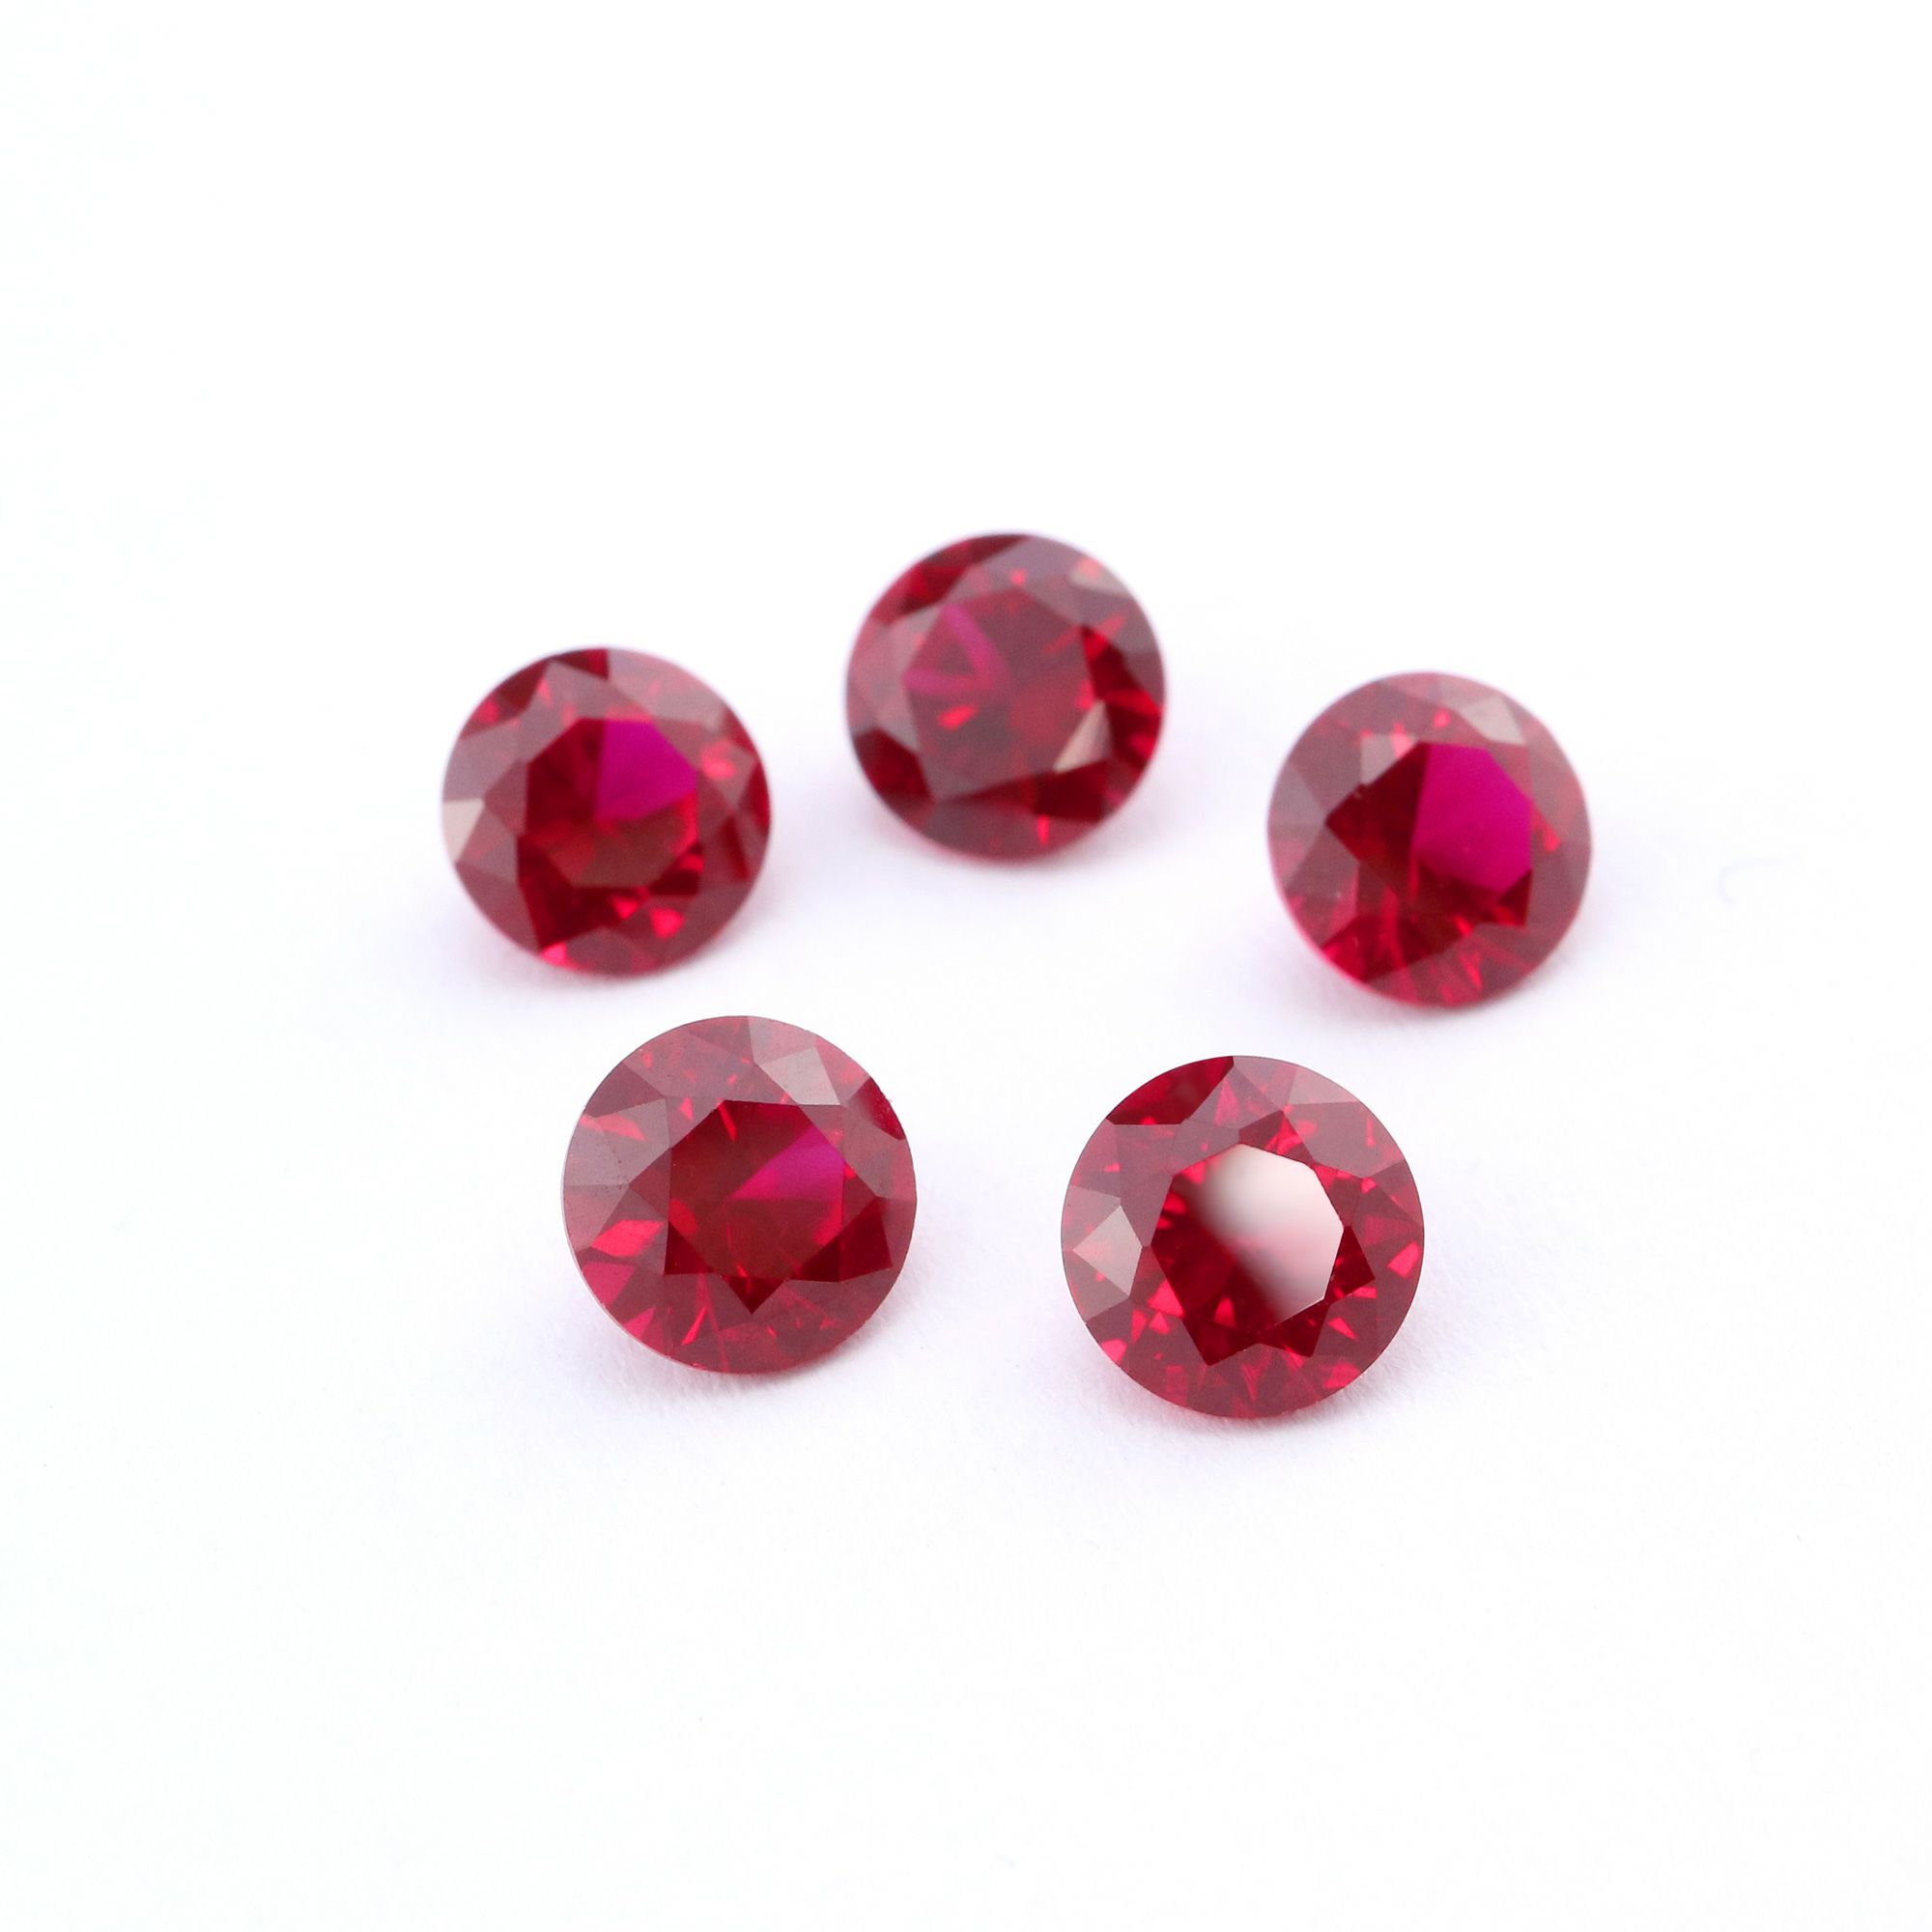 5Pcs Lab Created Round Ruby July Birthstone Red Faceted Loose Gemstone DIY Jewelry Supplies 4110166 - Click Image to Close